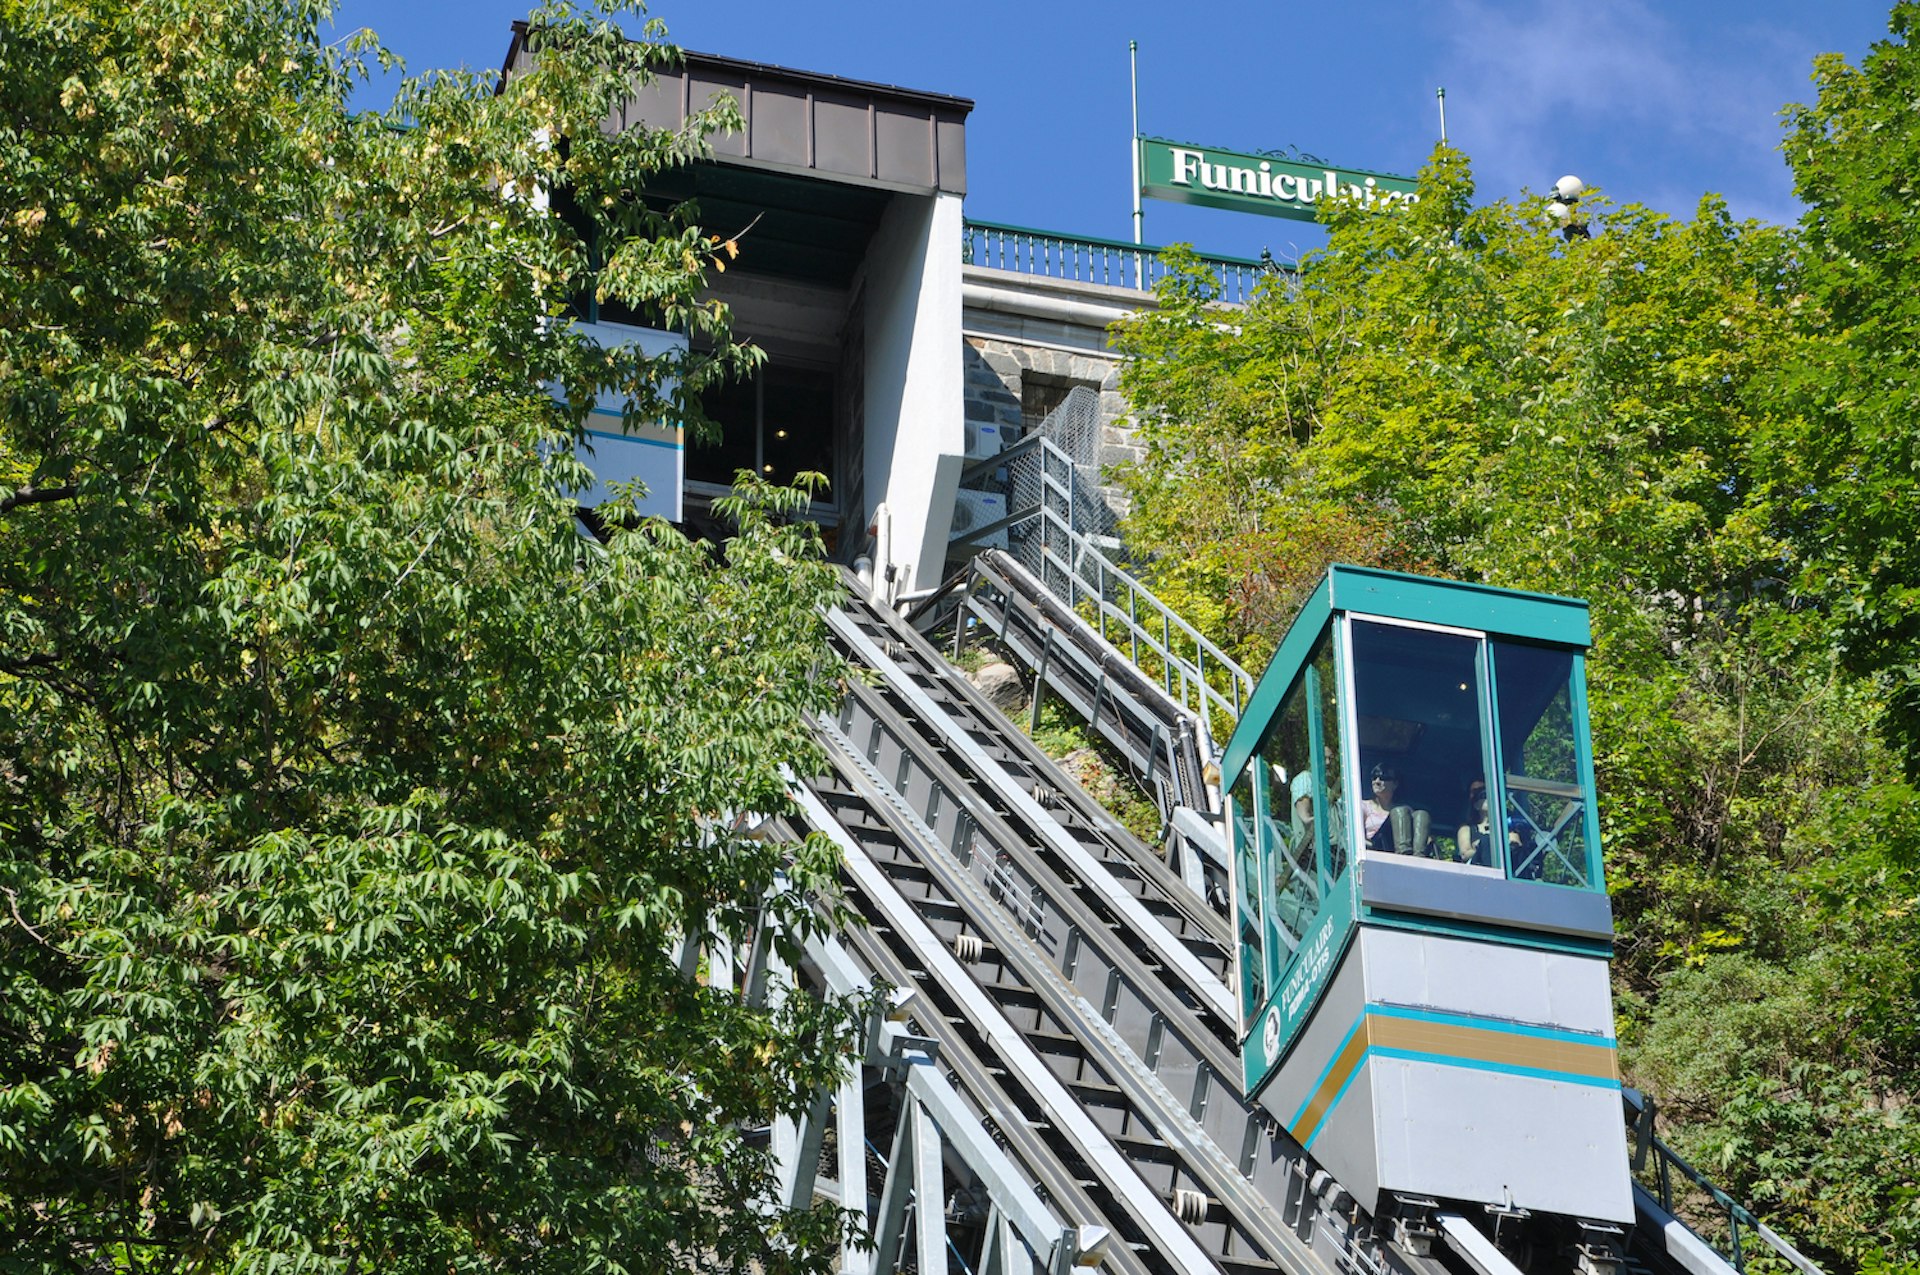 The funicular between Terrasse Dufferin in Upper Old Town and Petit-Champlain in Old Lower Town, Québec City, Québec, Canada